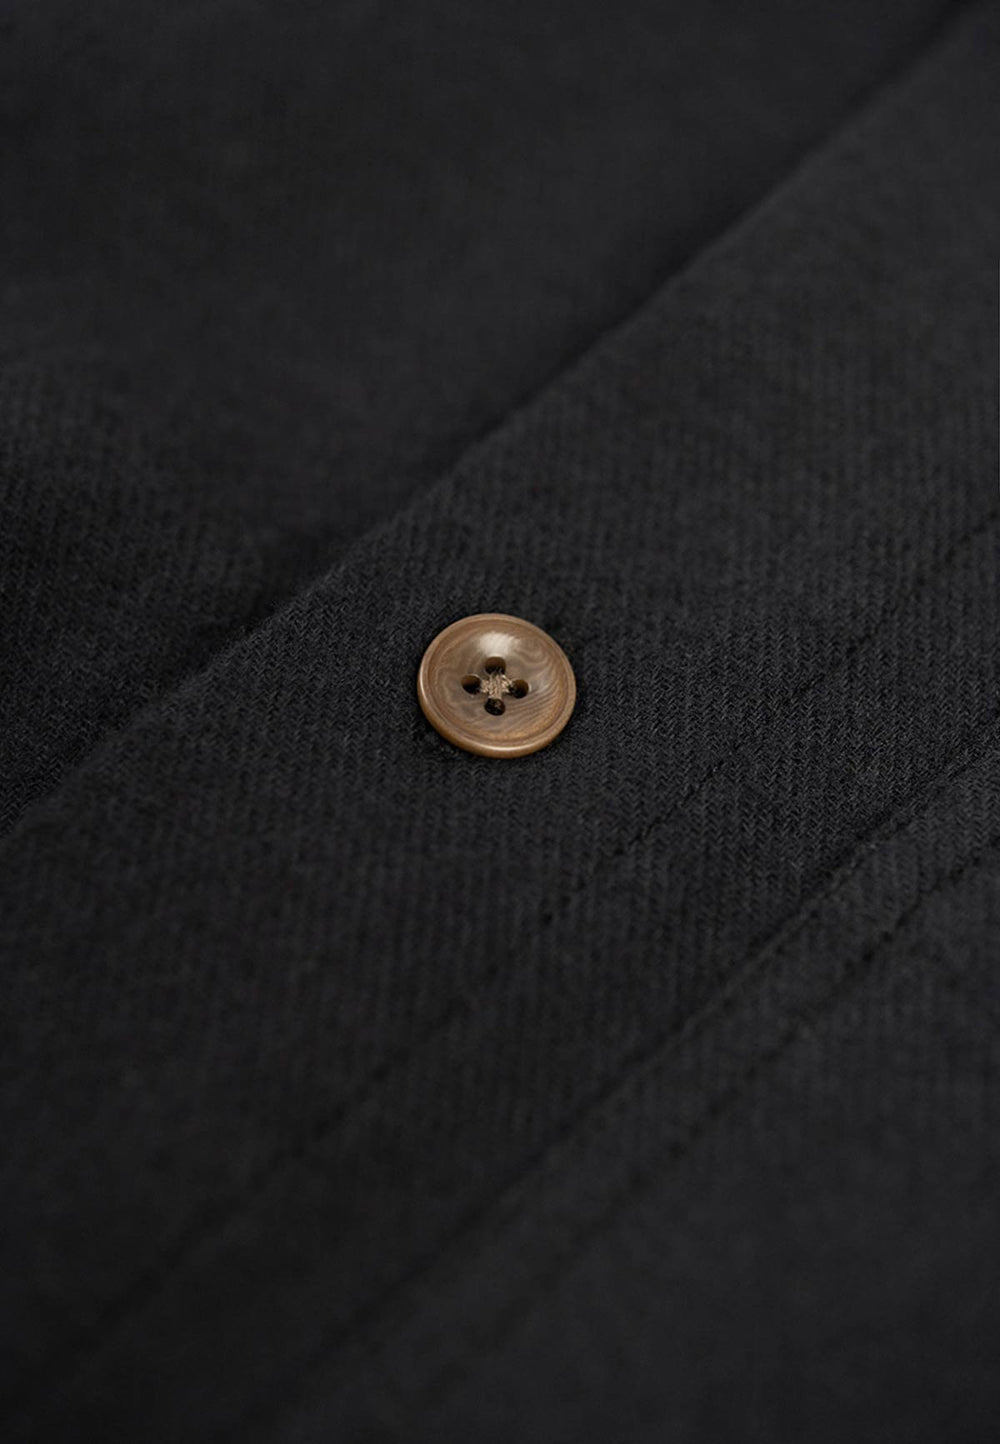 Close up of the button closure of a black flannell shirt.